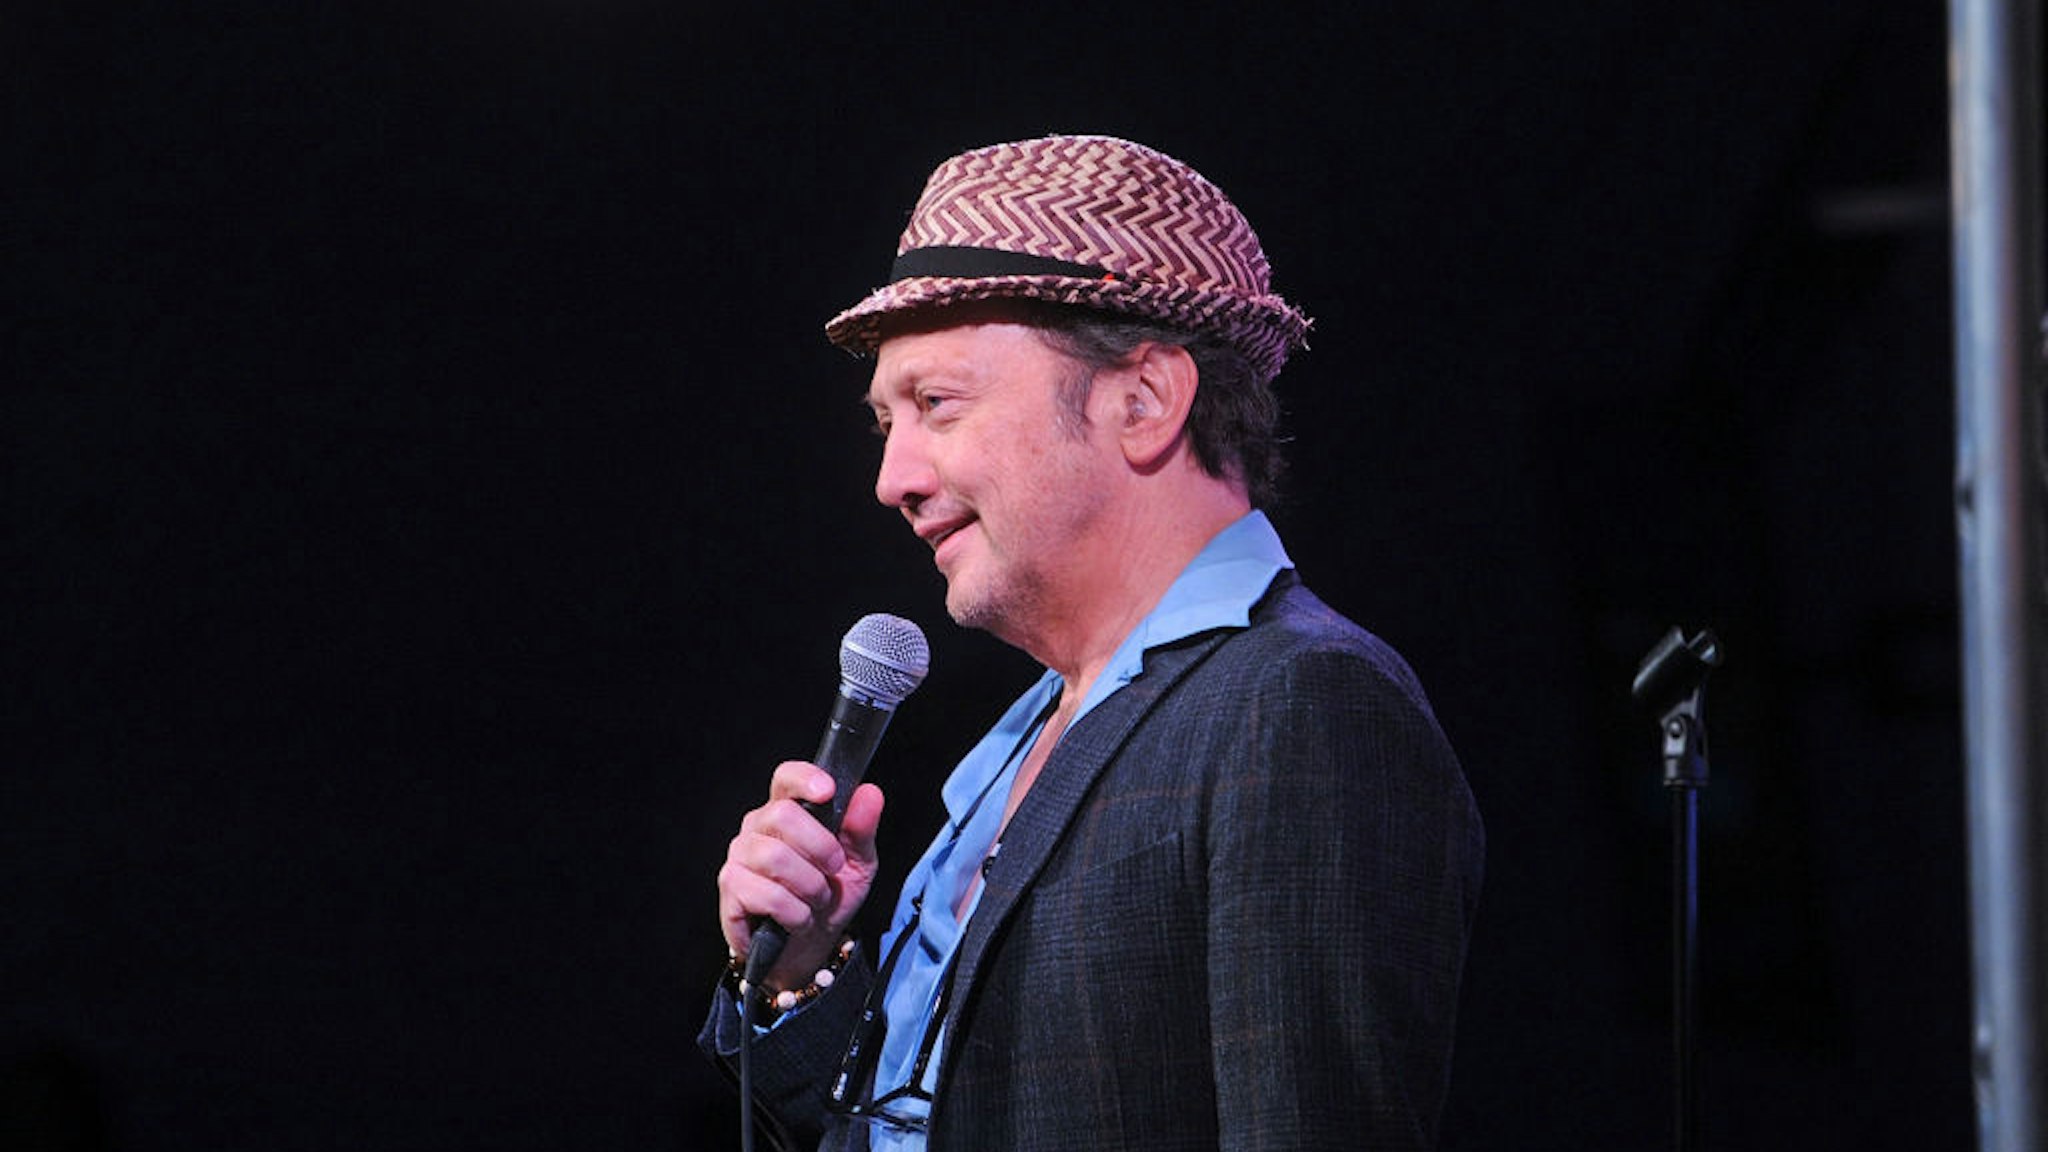 NEW BRUNSWICK, NJ - OCTOBER 18: Rob Schneider performs at The Stress Factory Comedy Club on October 18, 2021 in New Brunswick, New Jersey. (Photo by Bobby Bank/Getty Images)